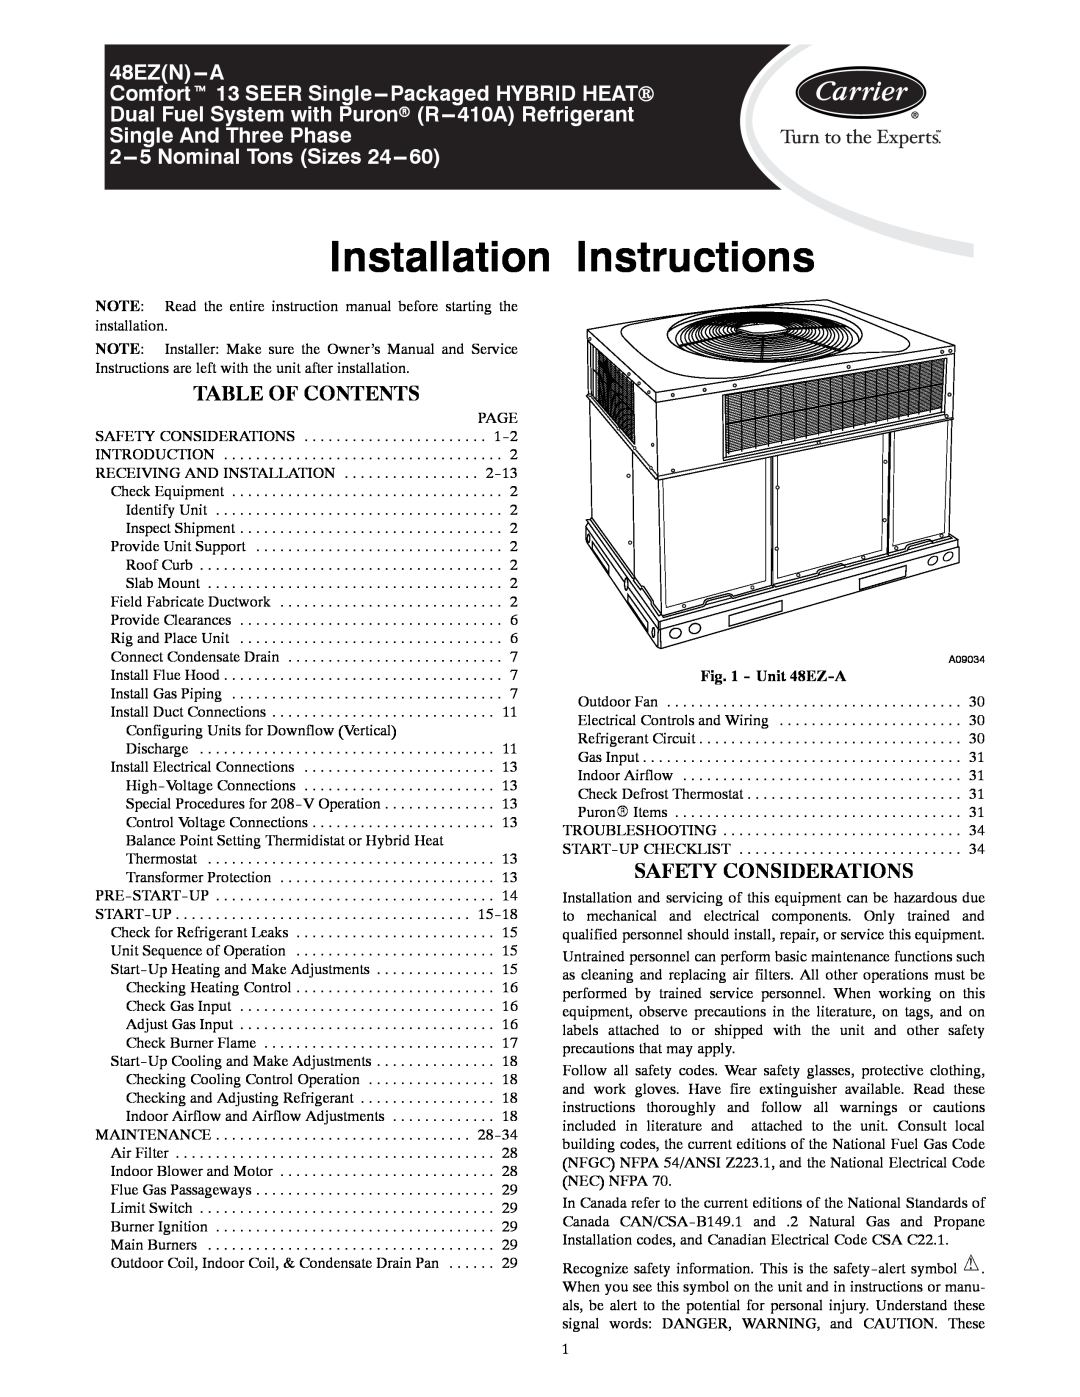 Carrier 48VT-A manual Owner’s Information Manual, 48EZ---Aand 48VT---A, Comfort and Performance 13 and 14 SEER, A09034 